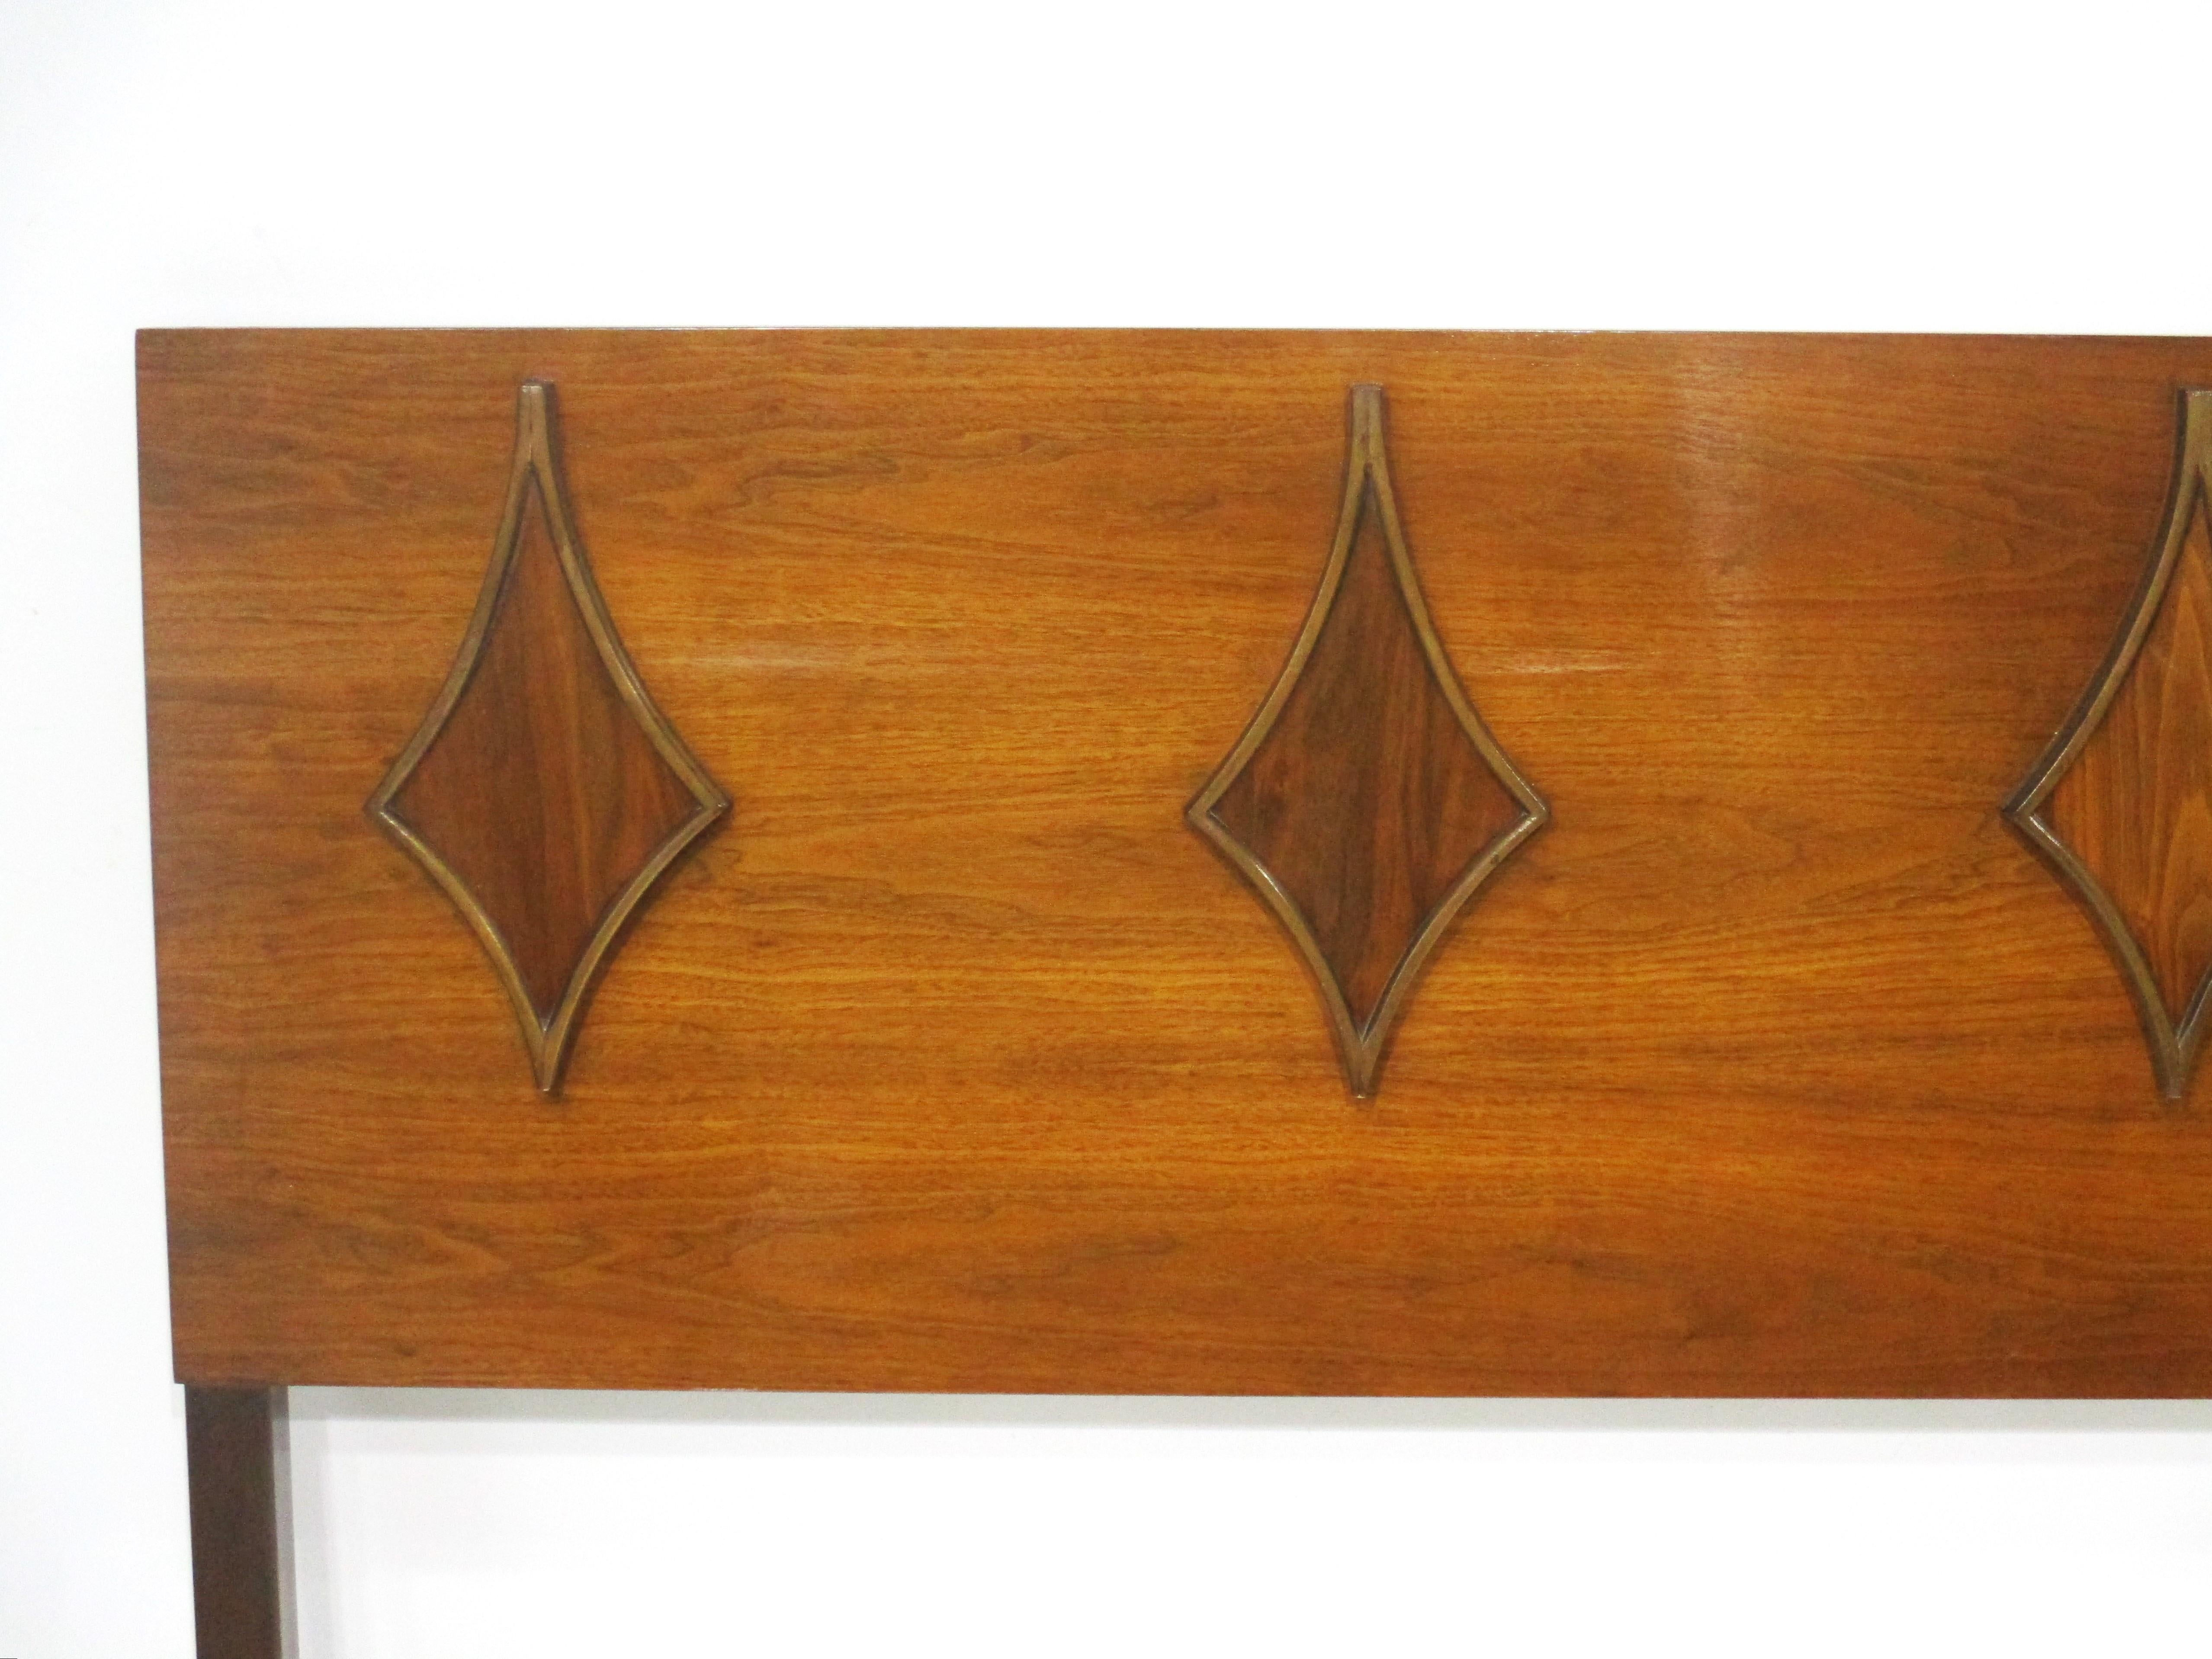 A Mid Century queen sized walnut headboard with sculptural diamond designs to the front . Manufactured and designed in the manner of the G Plan furniture company with a slight satin gloss finish making the piece rich and showing off the graining .